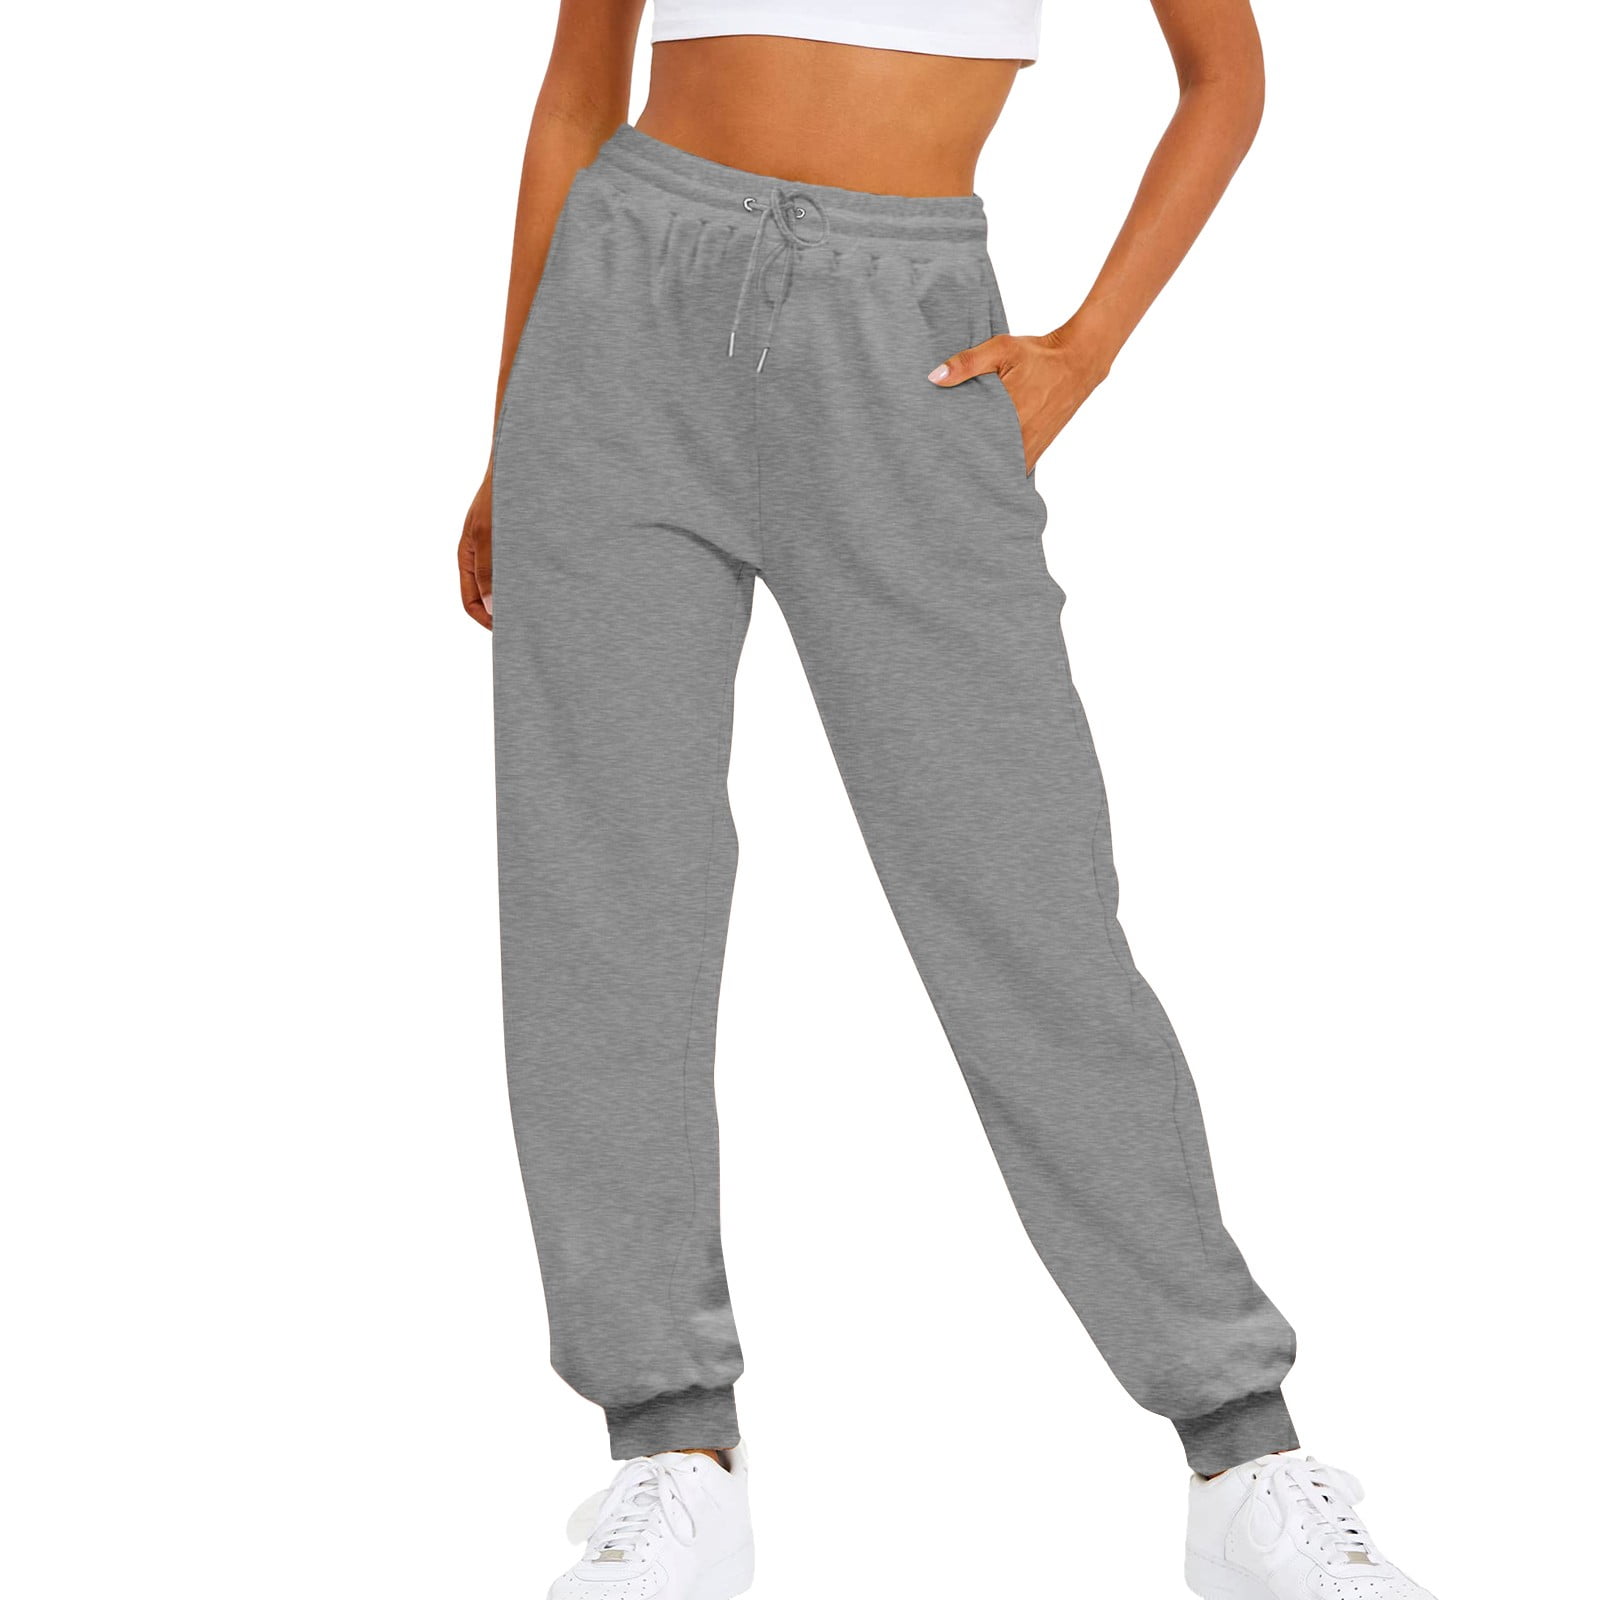 JYYYBF Fleece Baggy Sweatpants for Women Elastic High Waisted Casual Long  Joggers Trousers Workout Active Lounge Pants Grey S 